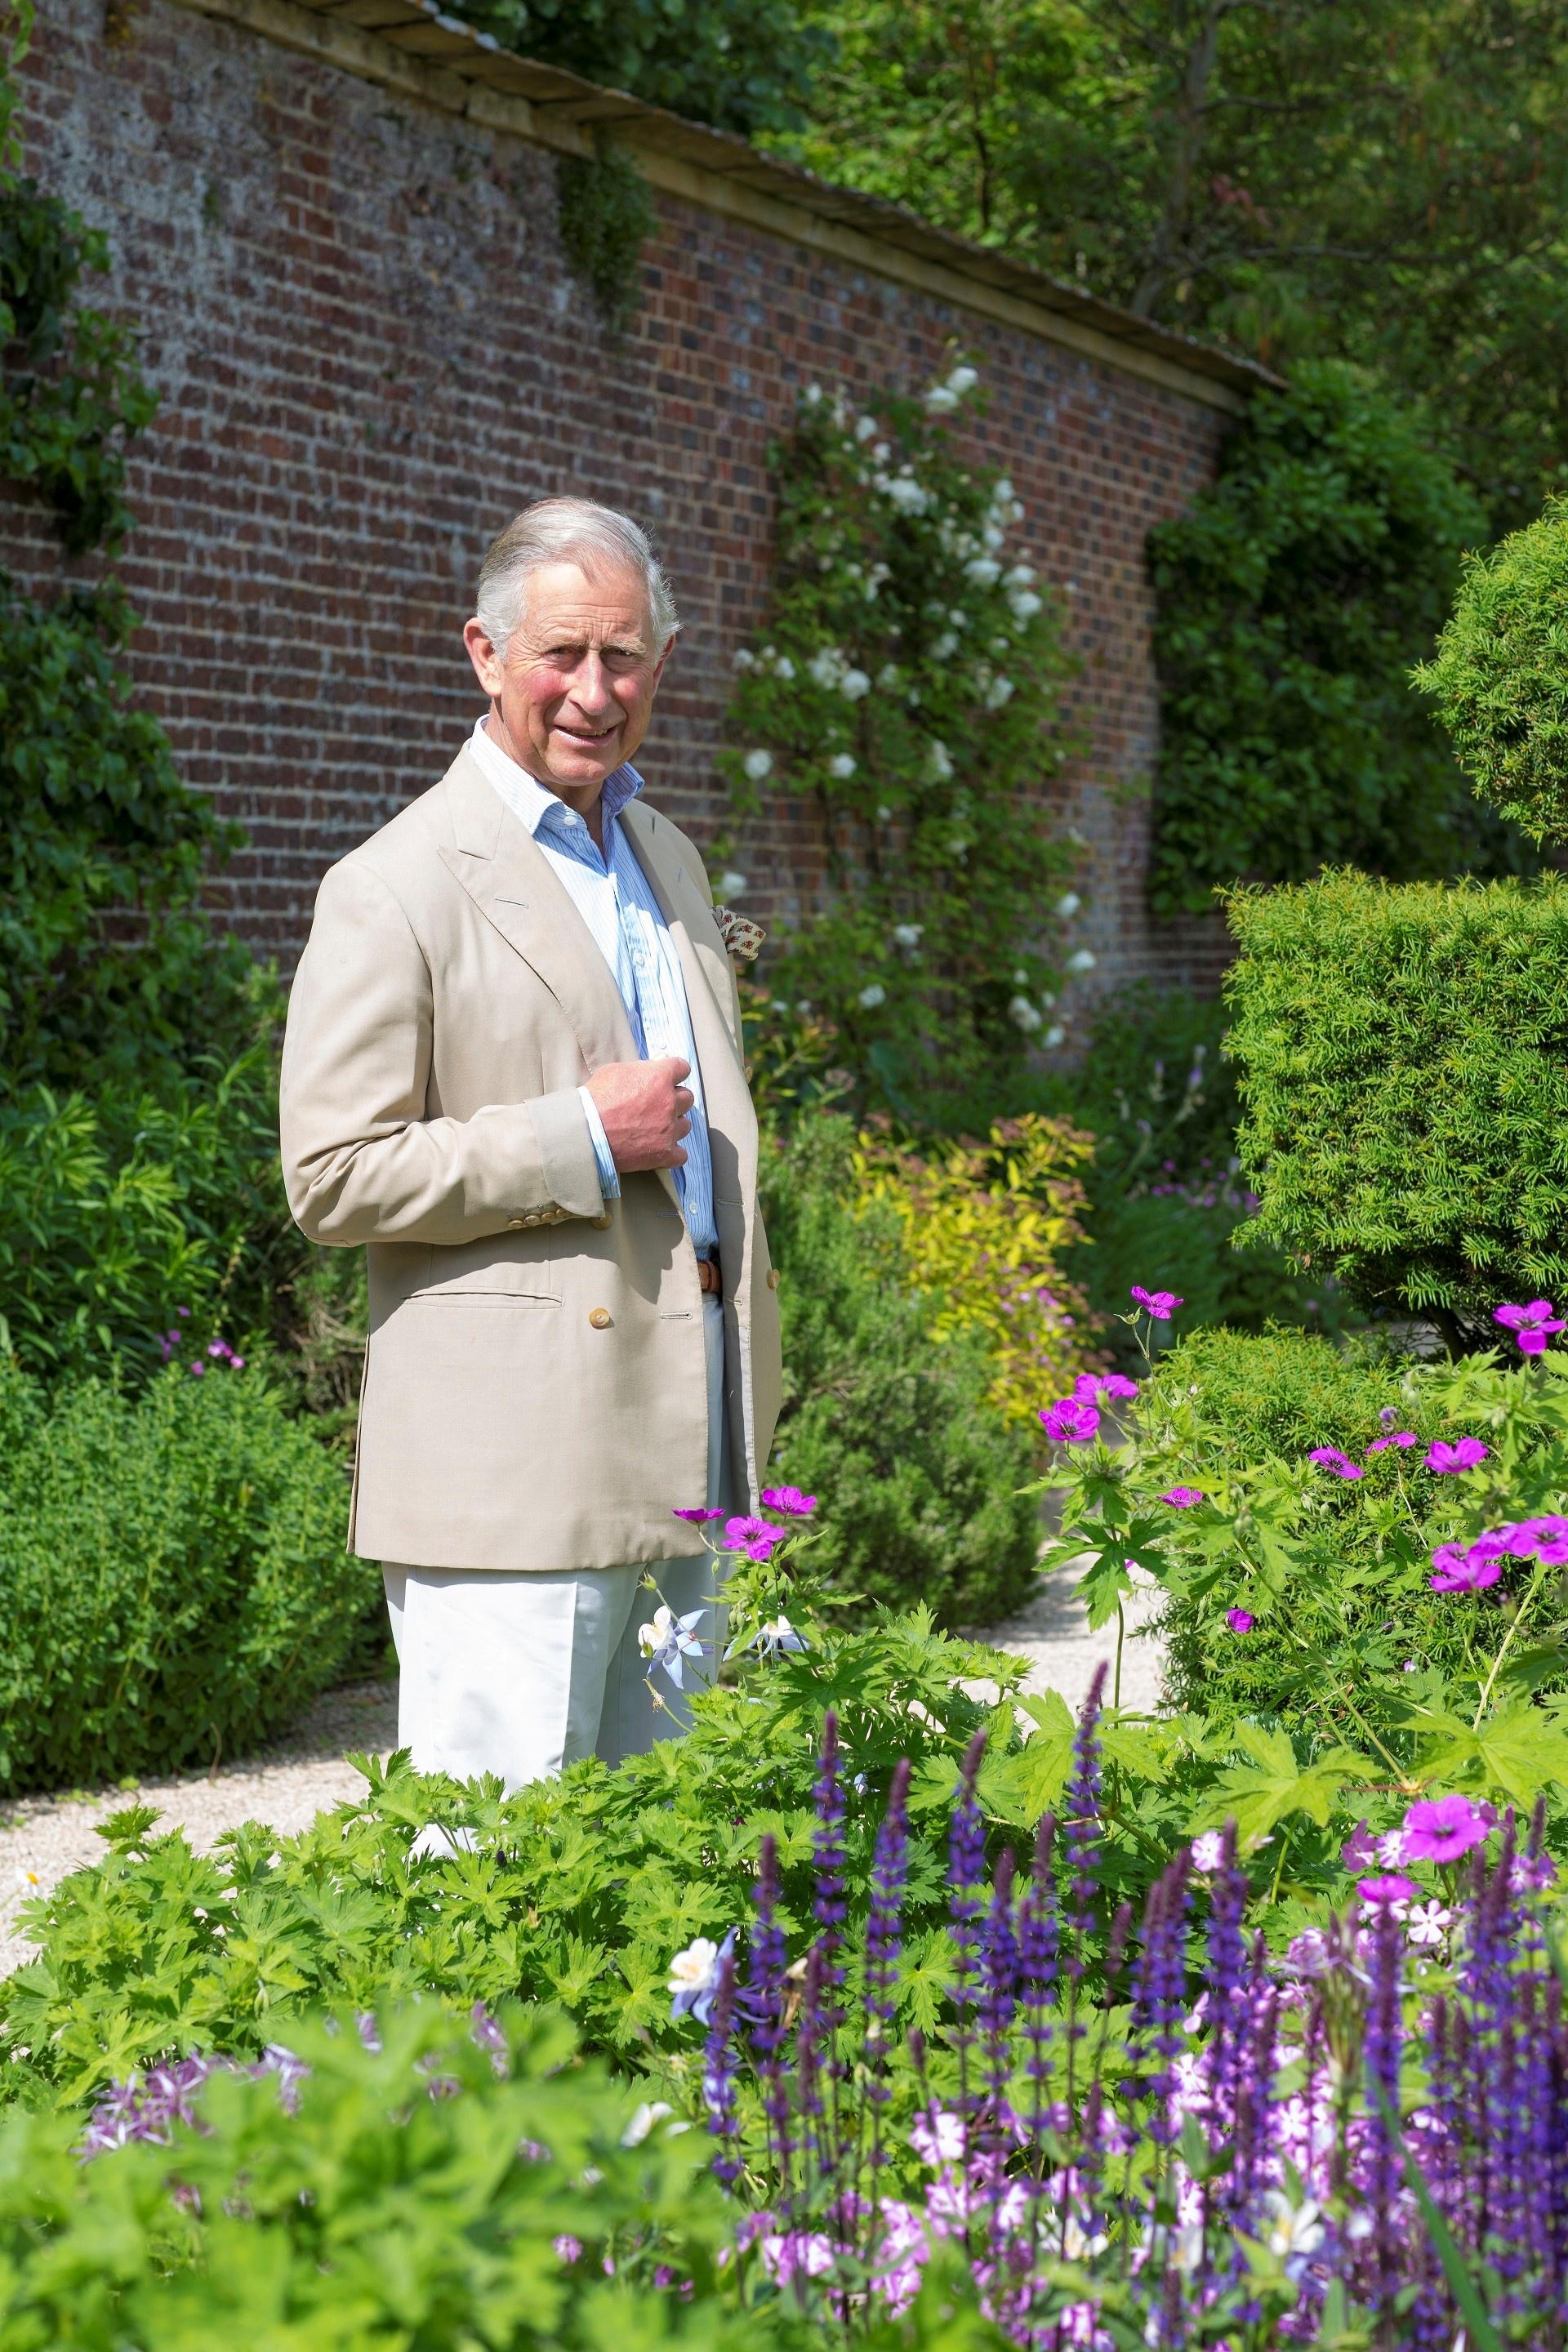 The Prince of Wales in the garden at Highgrove.